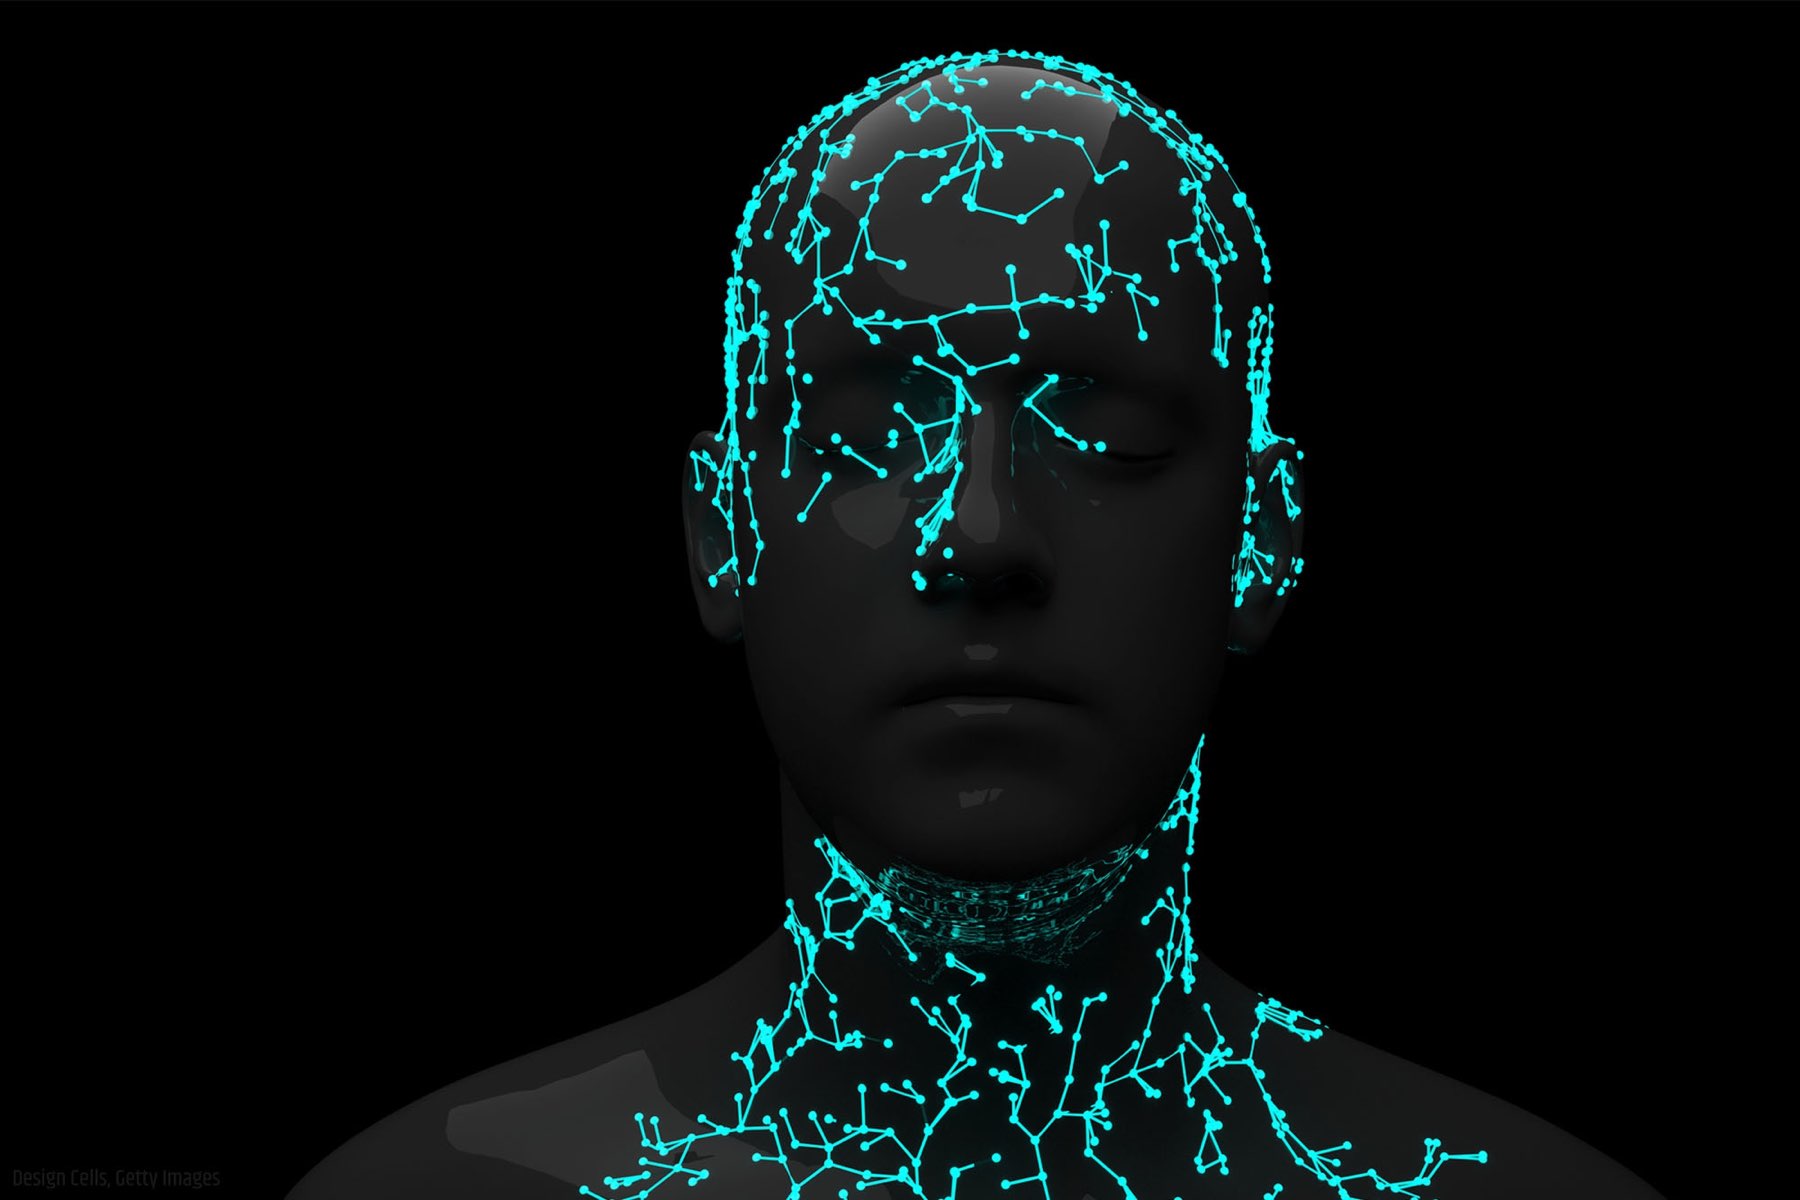 Neon neural net forming silhouette of head